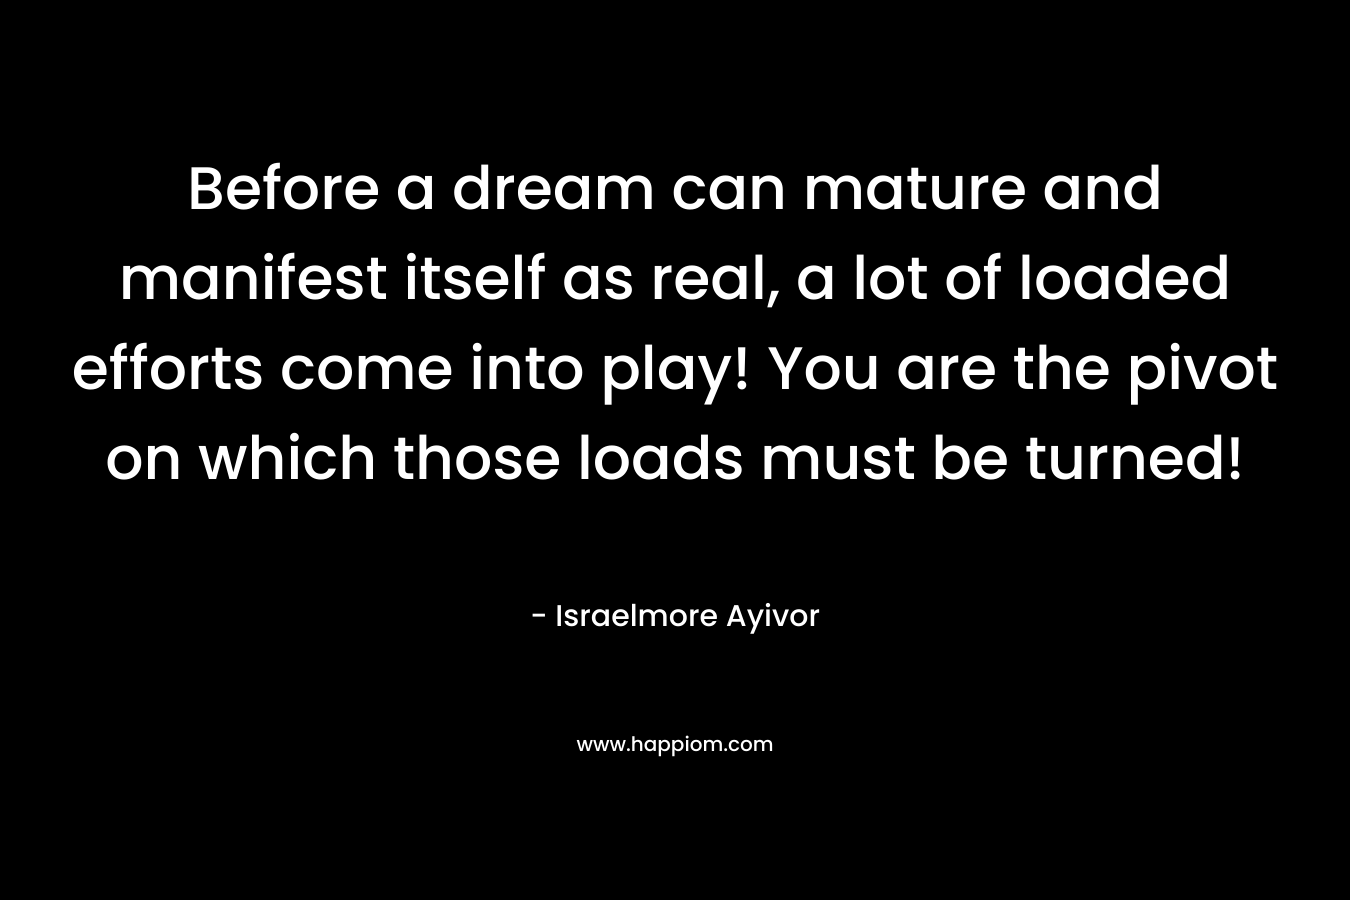 Before a dream can mature and manifest itself as real, a lot of loaded efforts come into play! You are the pivot on which those loads must be turned!